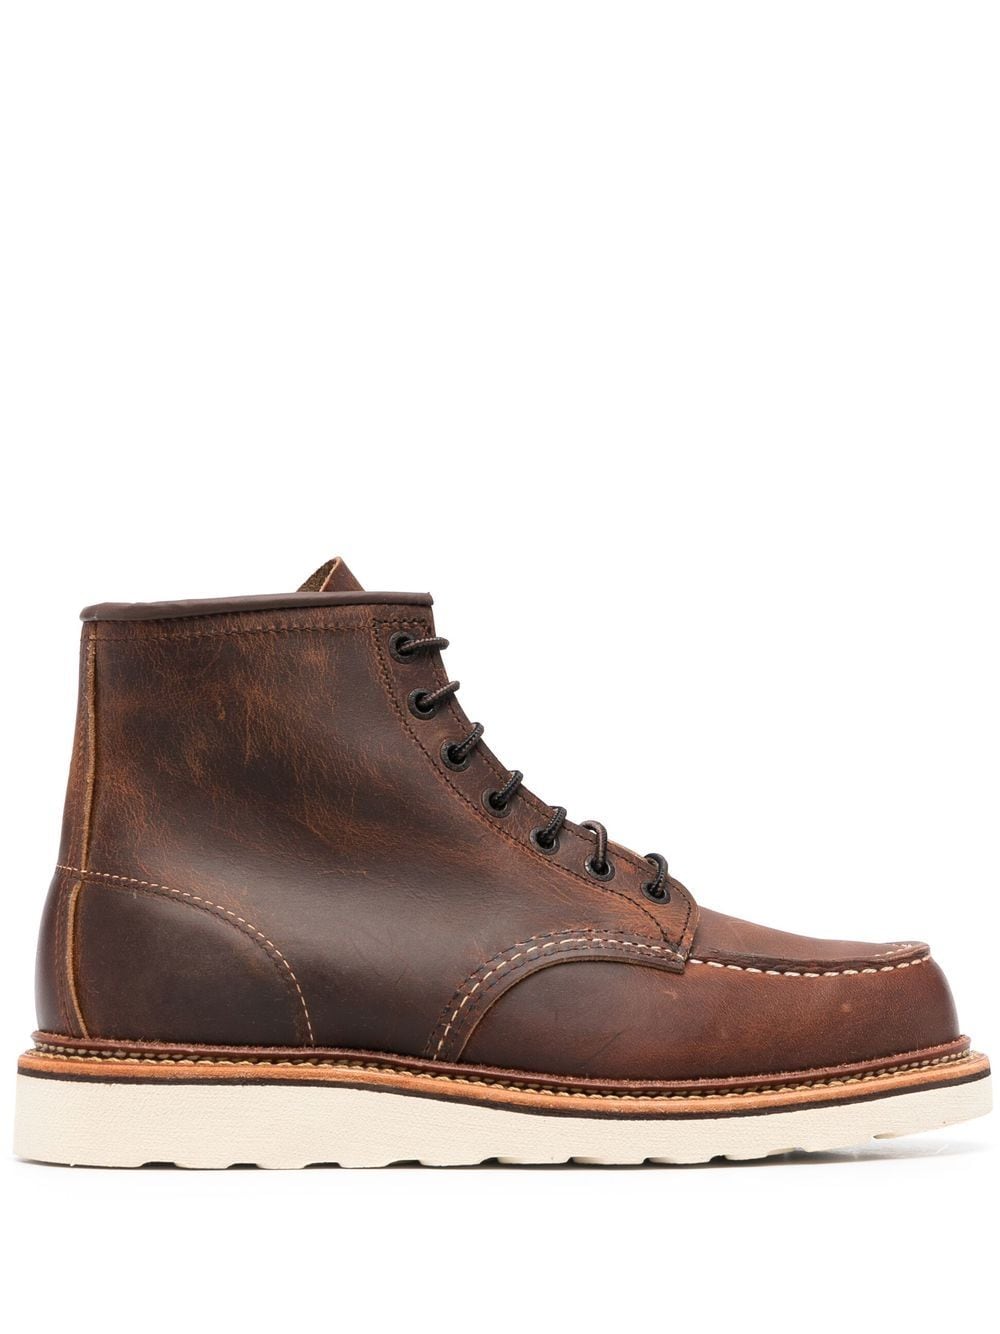 Red Wing Shoes 1907 Heritage Work Moc Toe boot - Brown von Red Wing Shoes